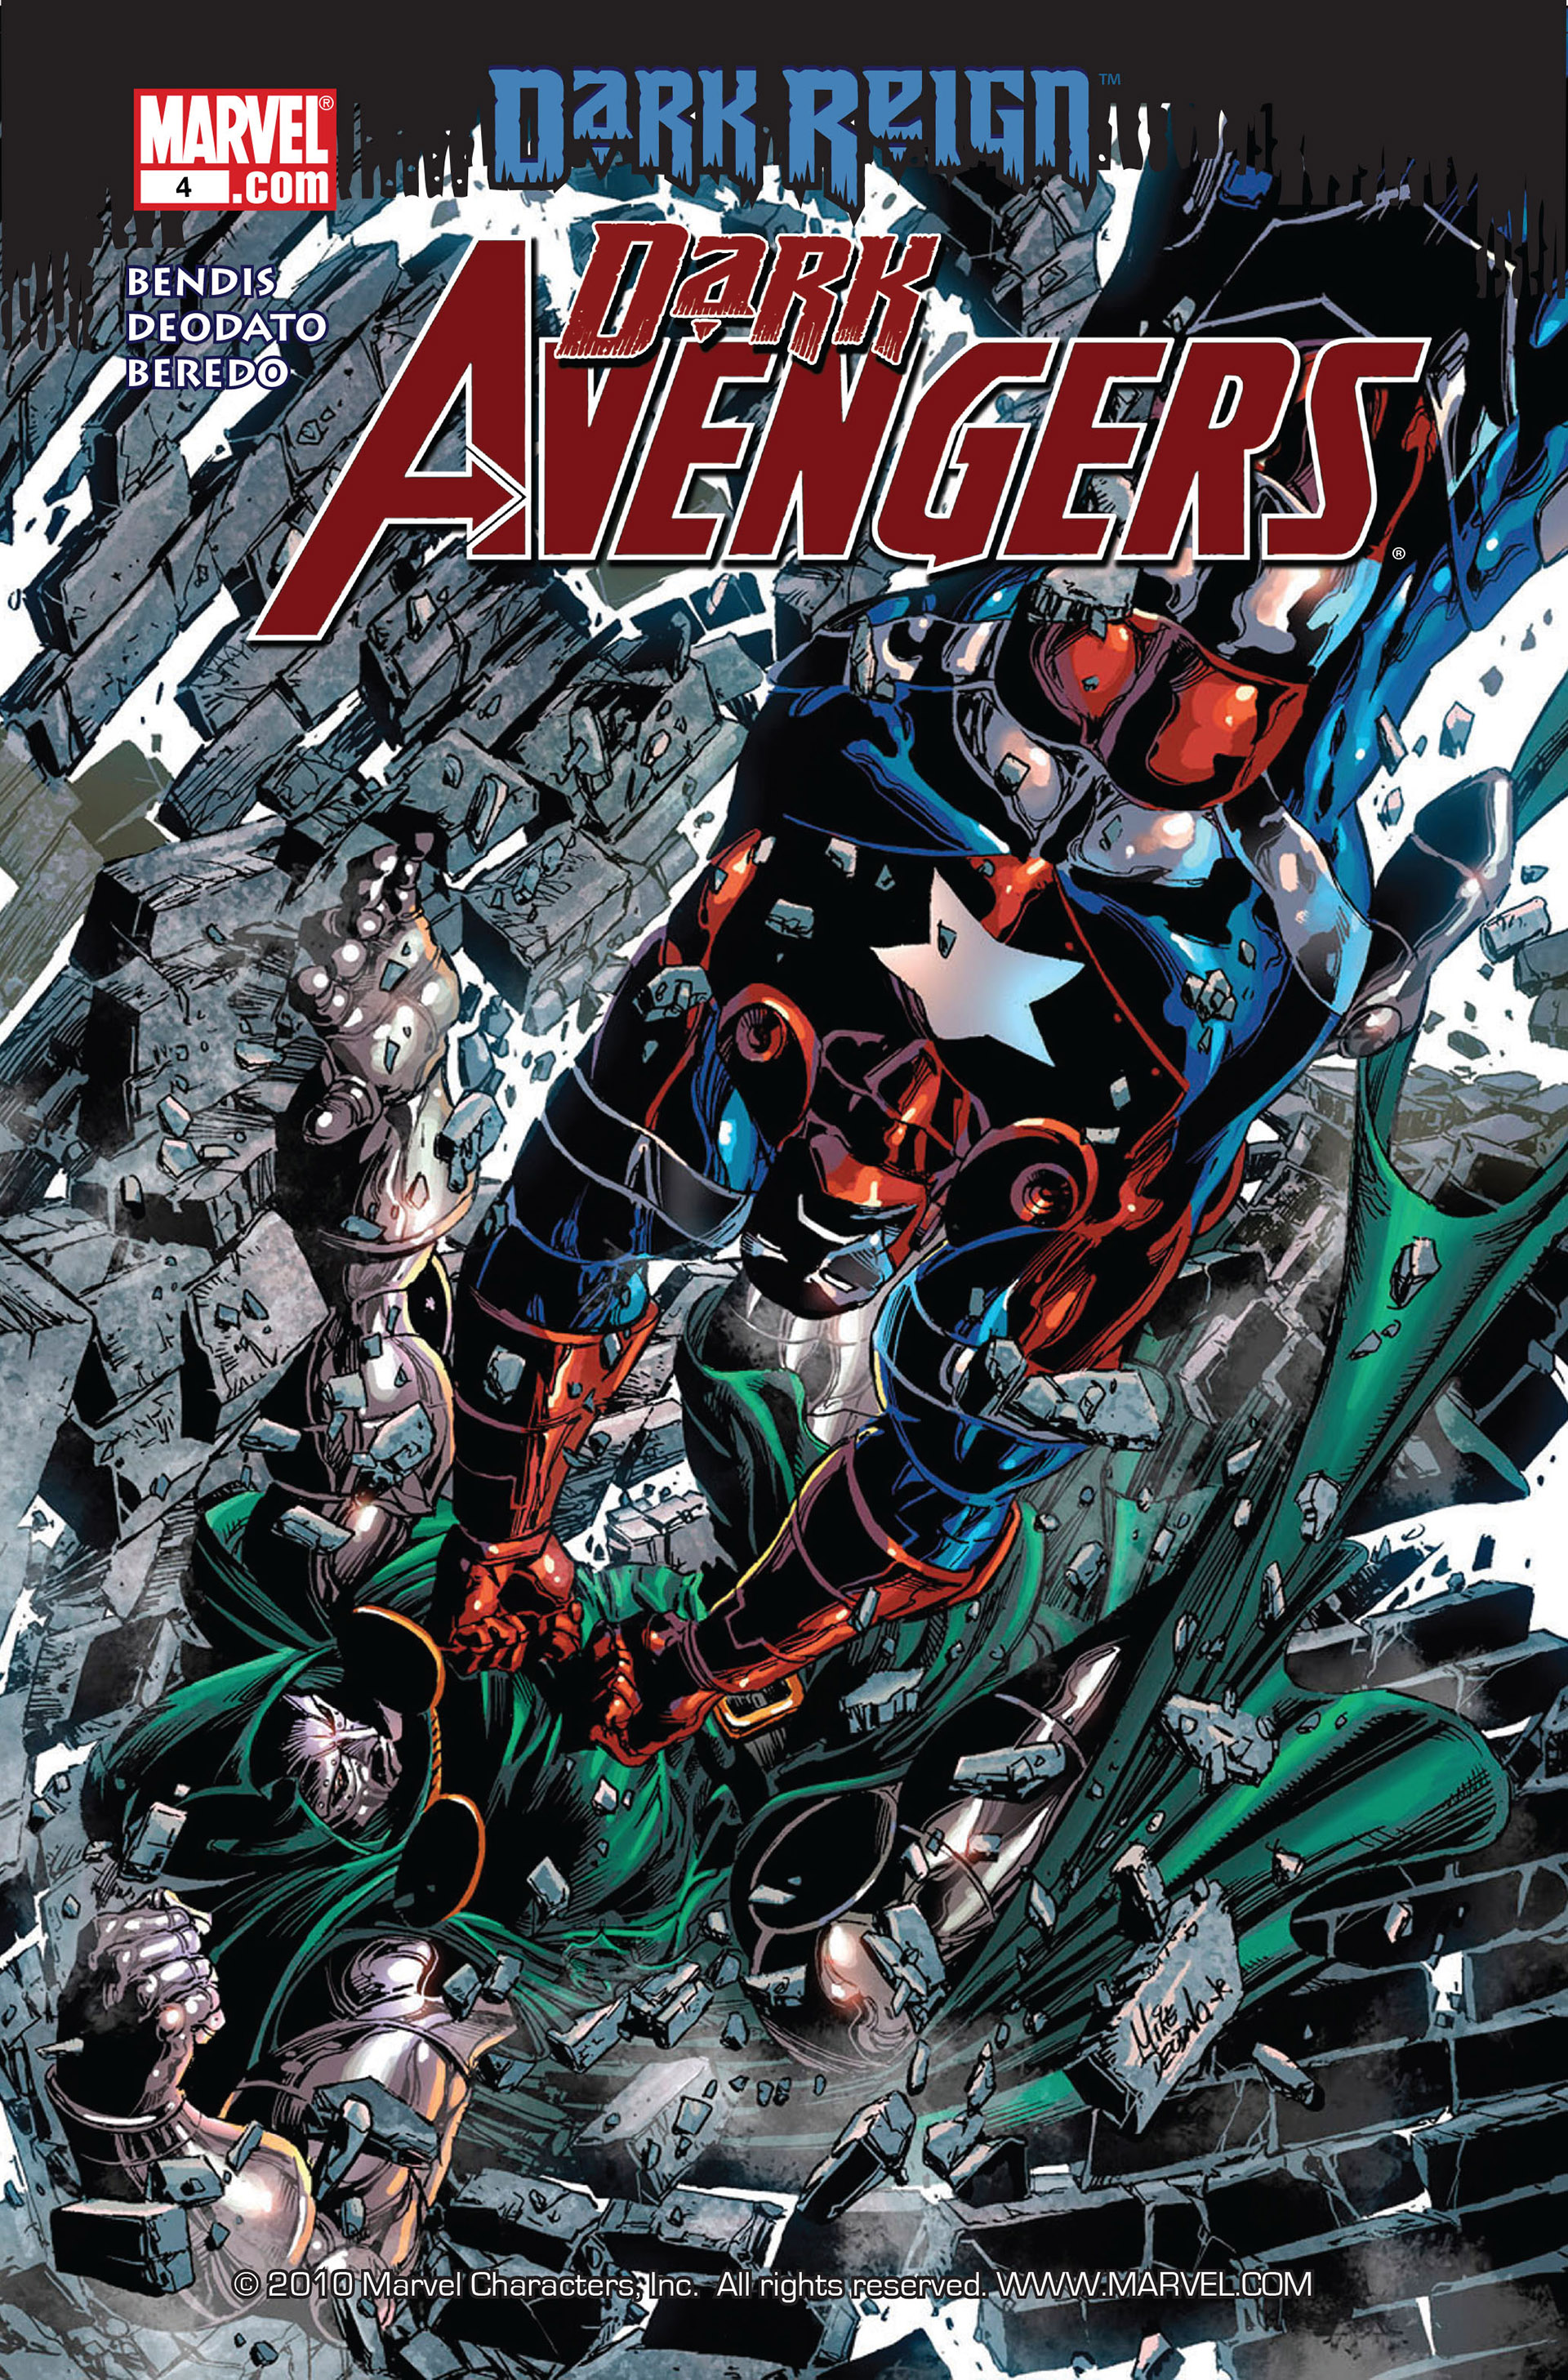 Amazing Dark Avengers Pictures & Backgrounds